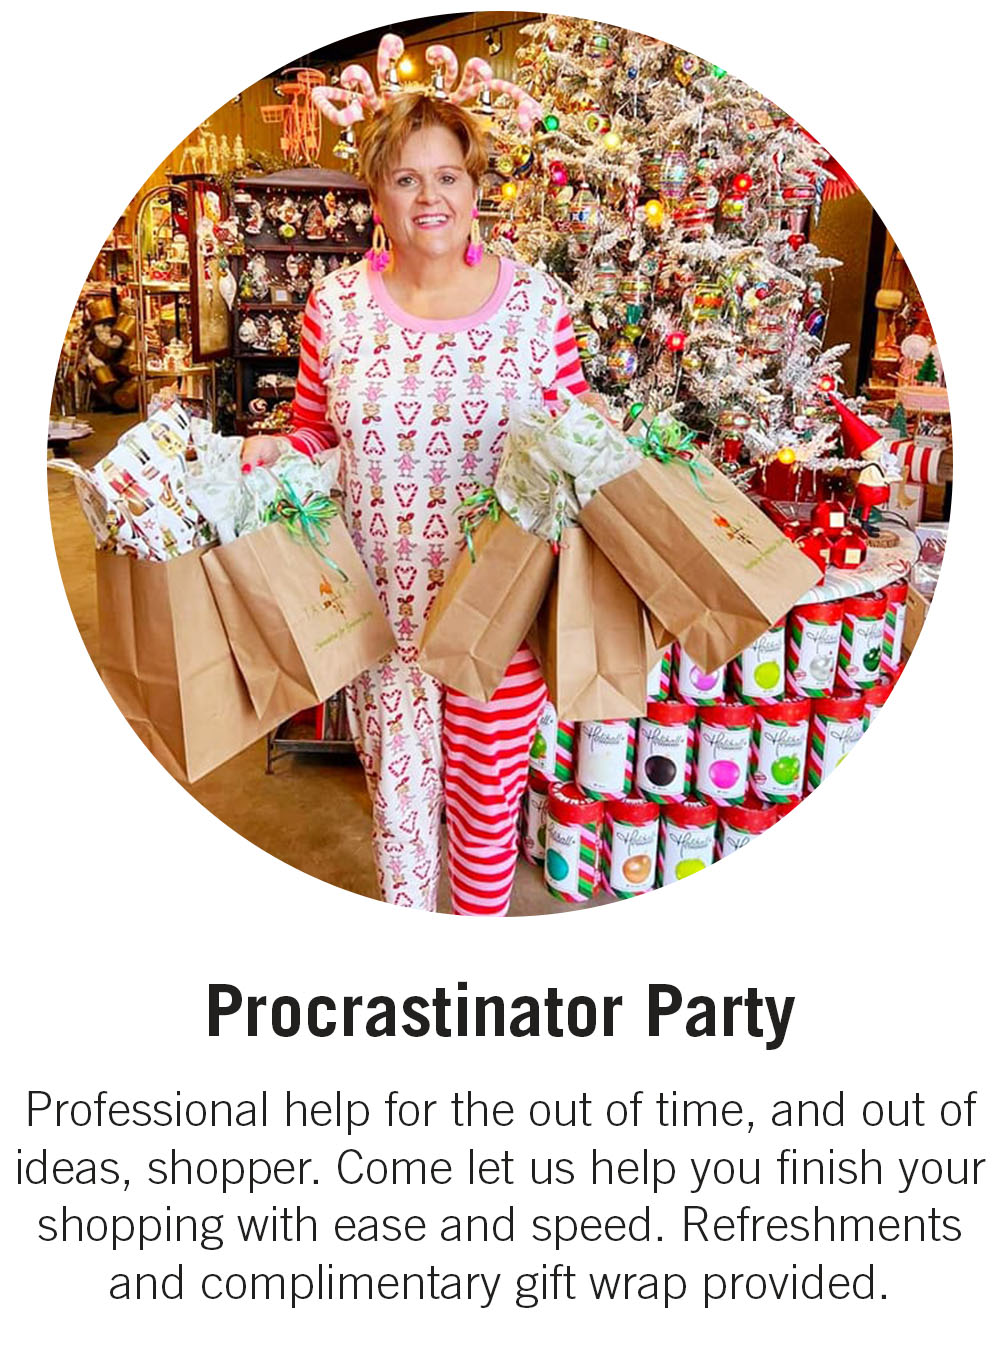 Procrastinator Party Professional help for the out of time, and out of ideas, shopper. Come let us help you finish your shopping with ease and speed. Refreshments and complimentary gift wrap provided. 